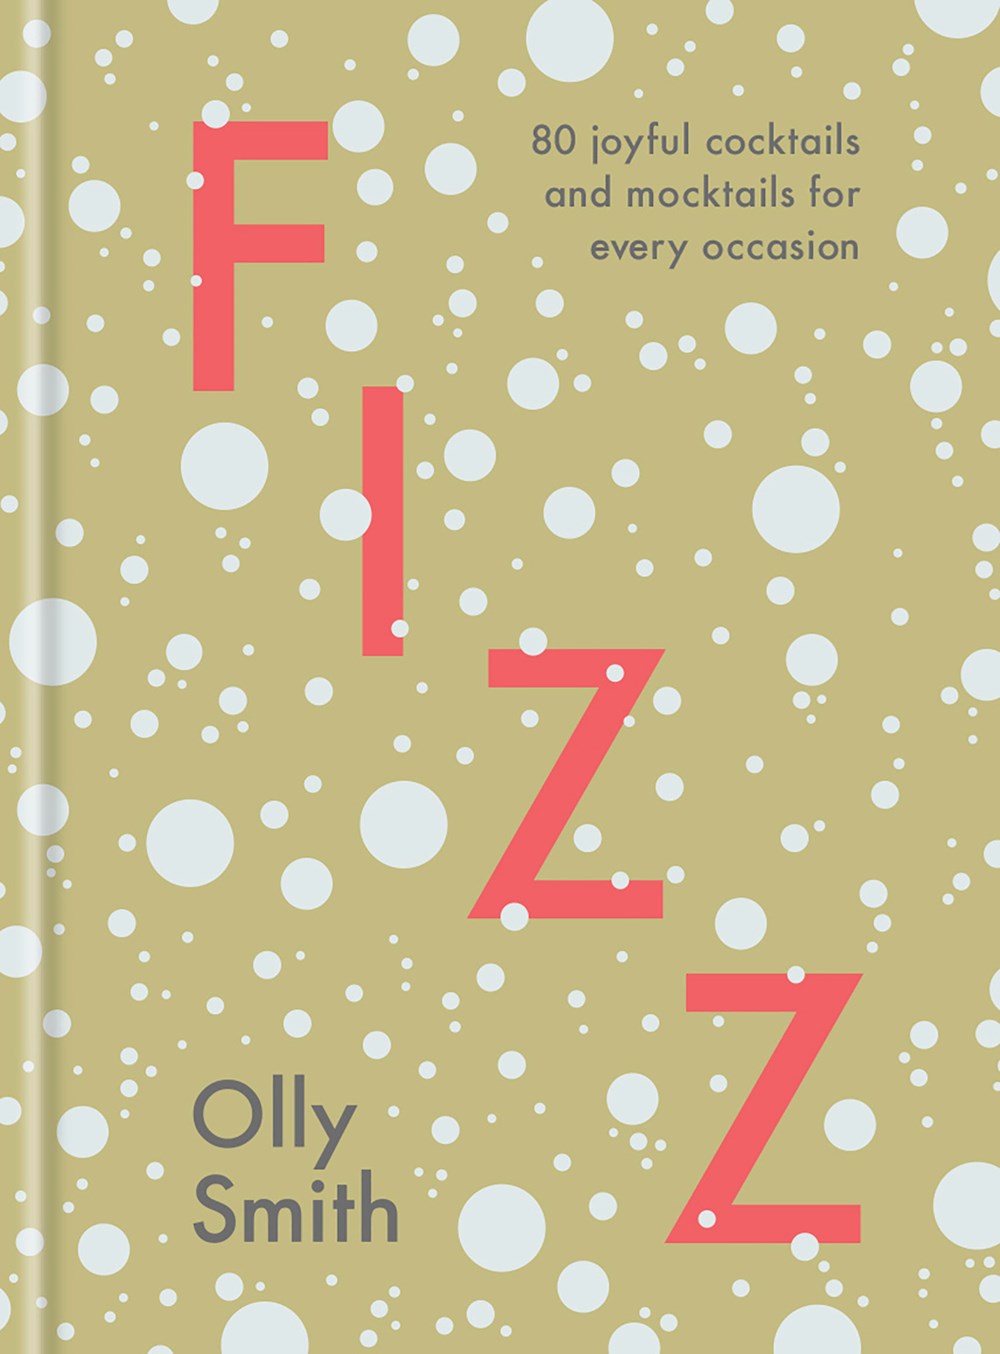 Image for "Fizz"